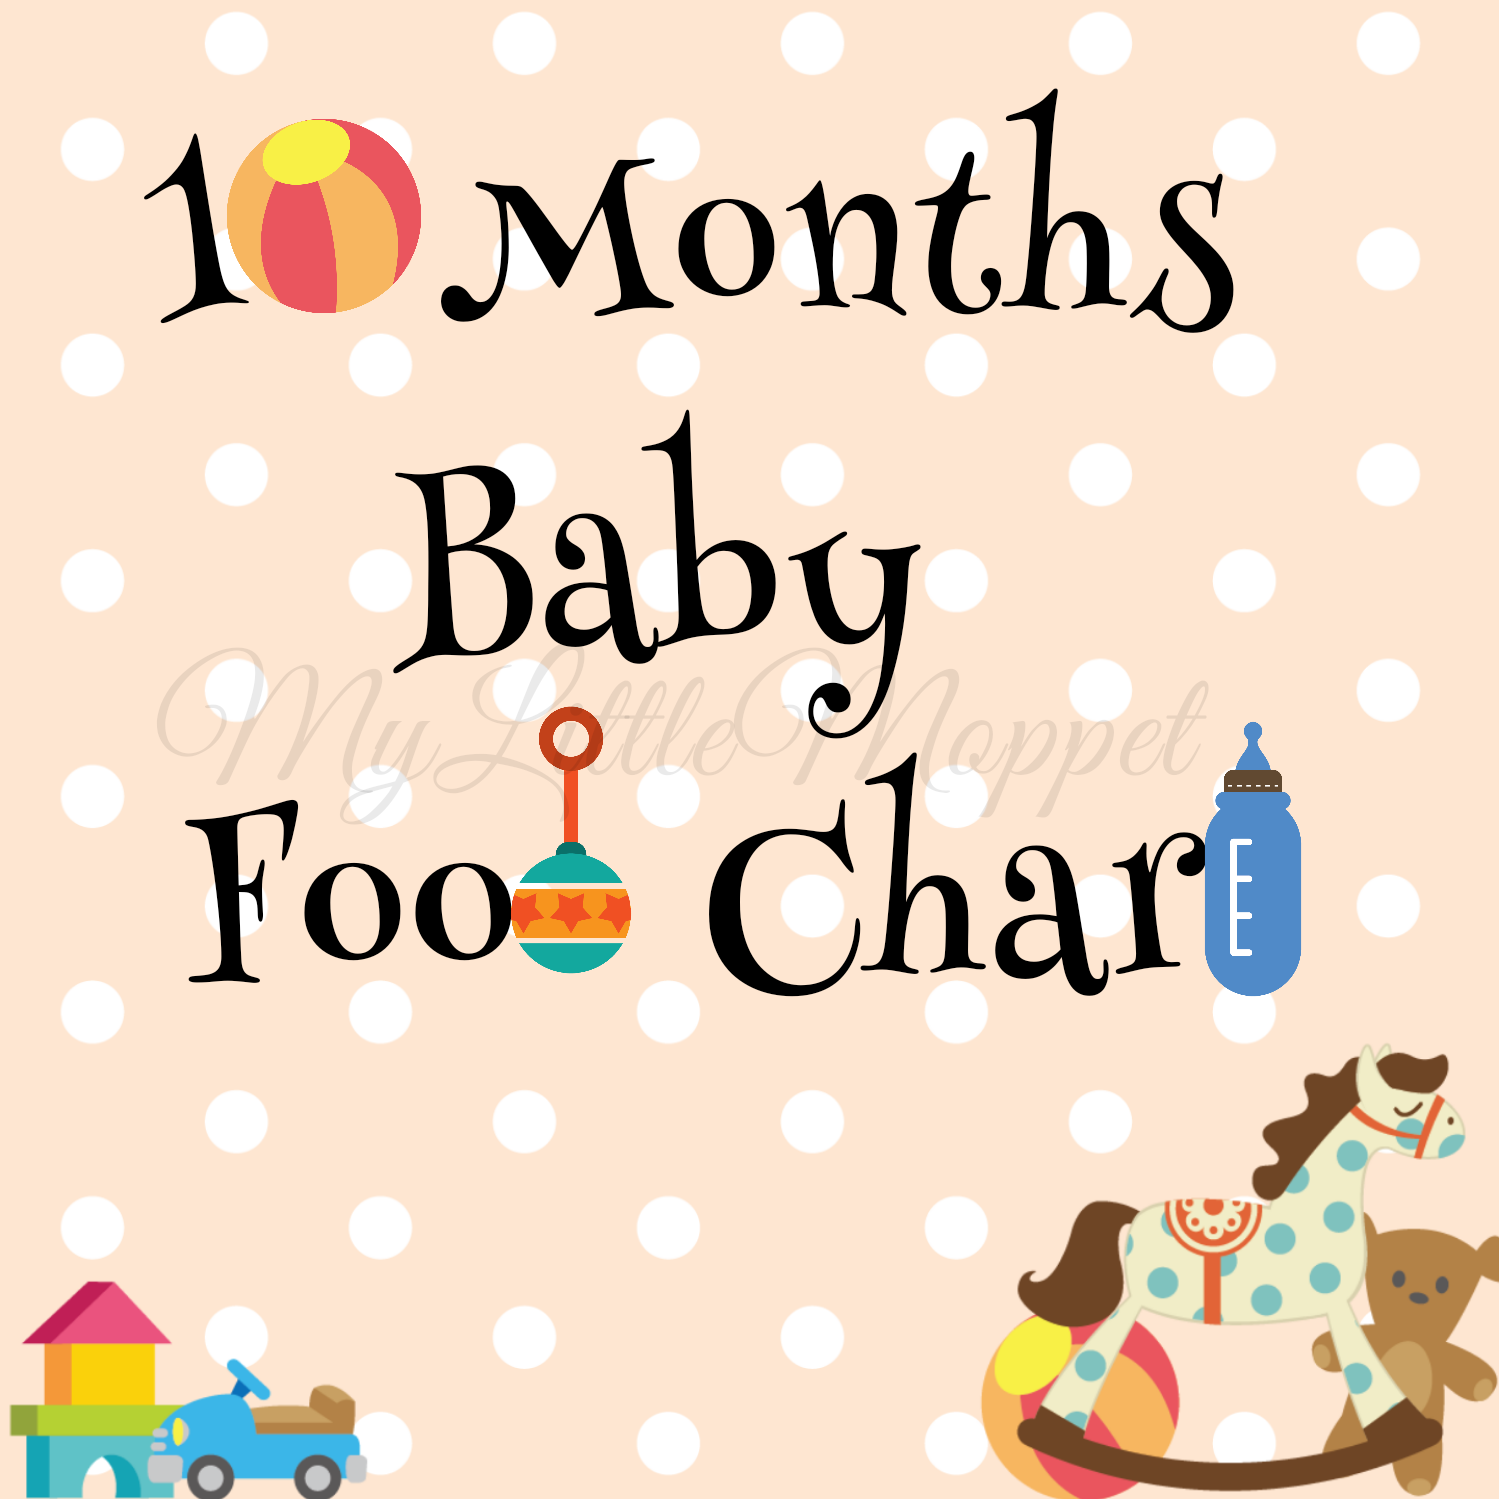 10 Months Baby Food Chart - My Little Moppet